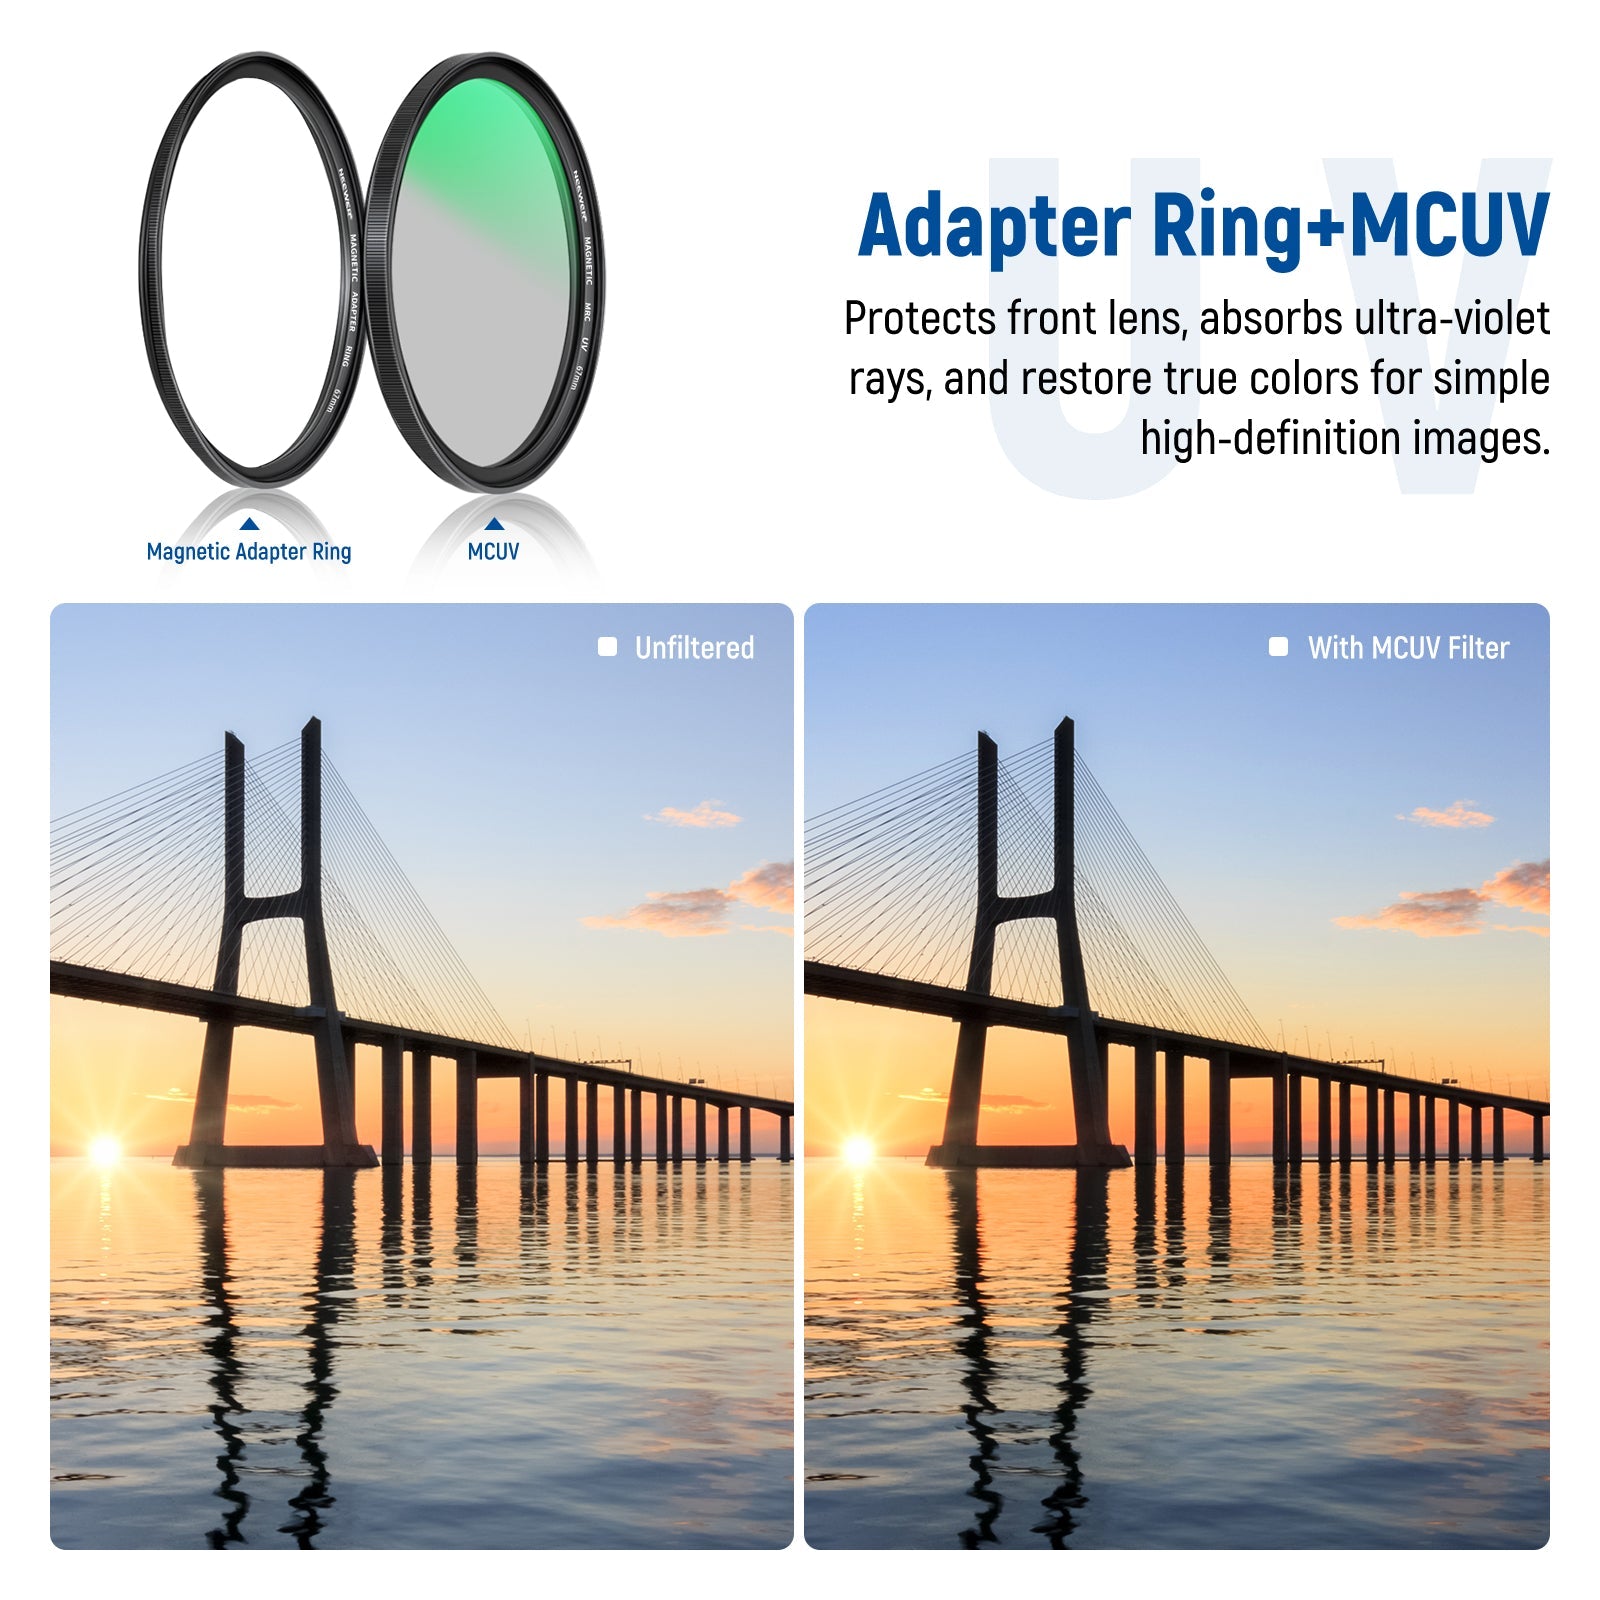 NEEWER 5-in-1 Magnetic Lens Filter Kit with ND1000+MCUV+CPL+Adapter Ring+Filter Cap